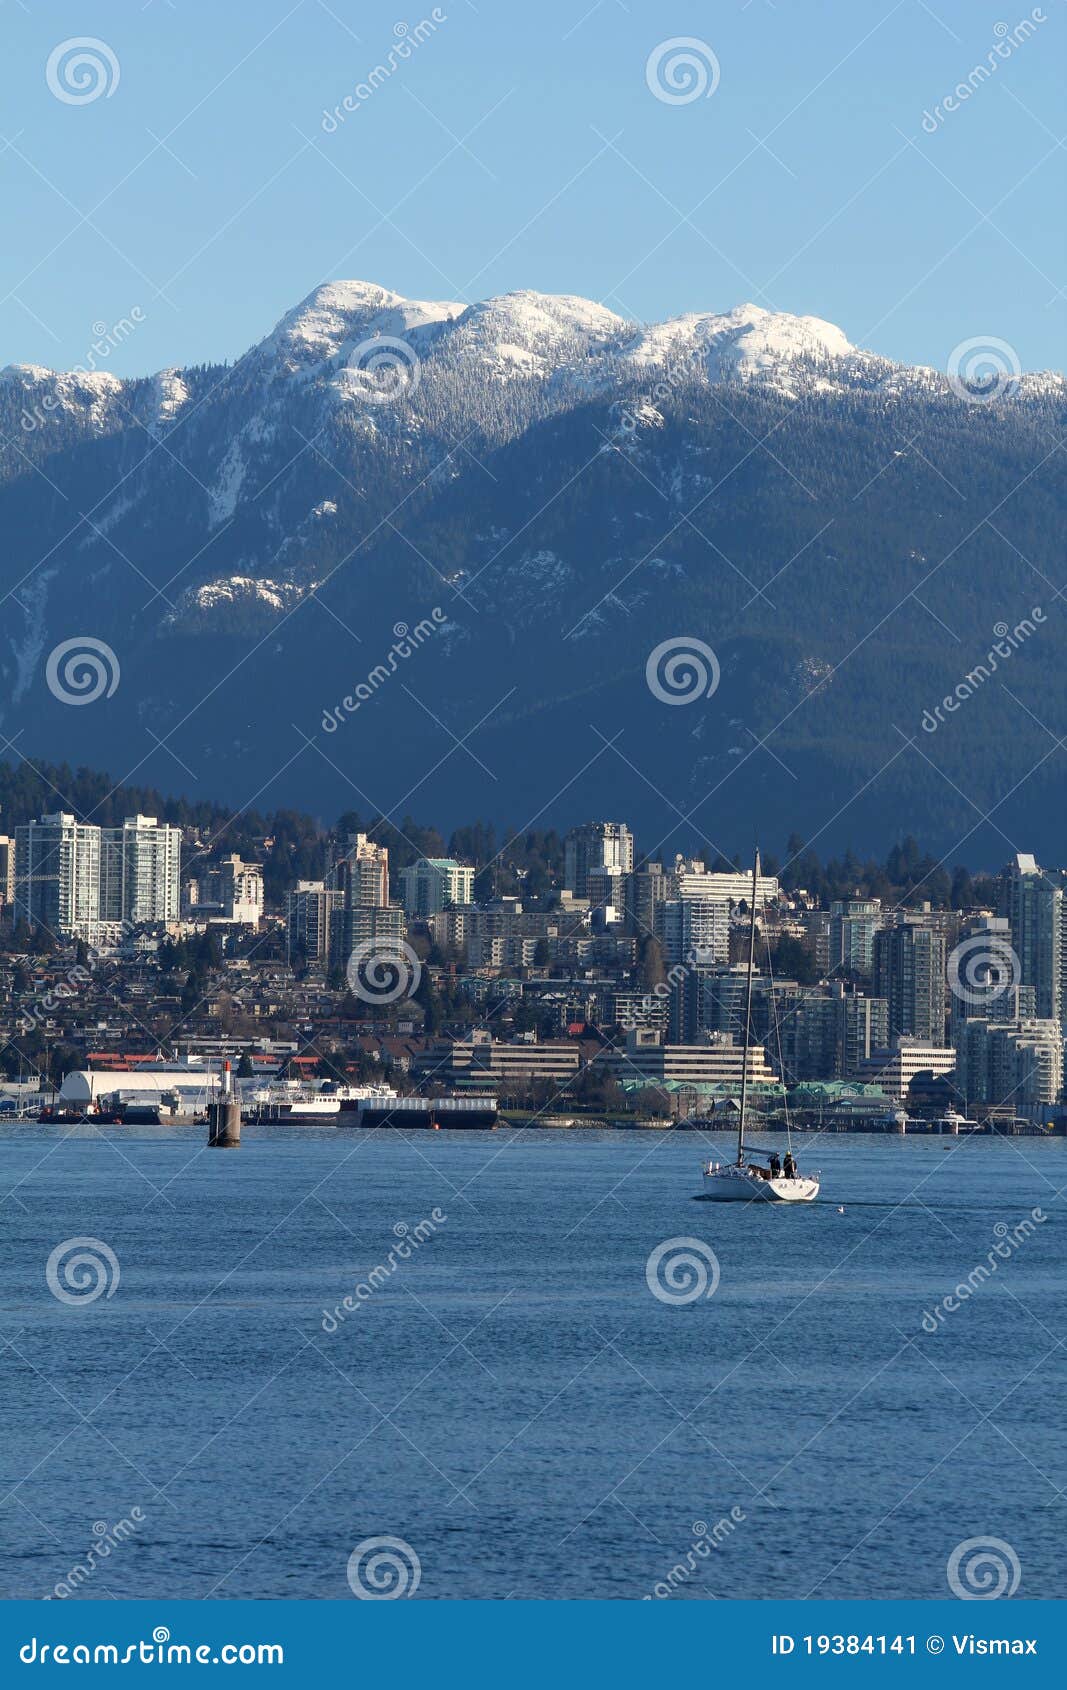 north vancouver, burrard inlet, coast mountains